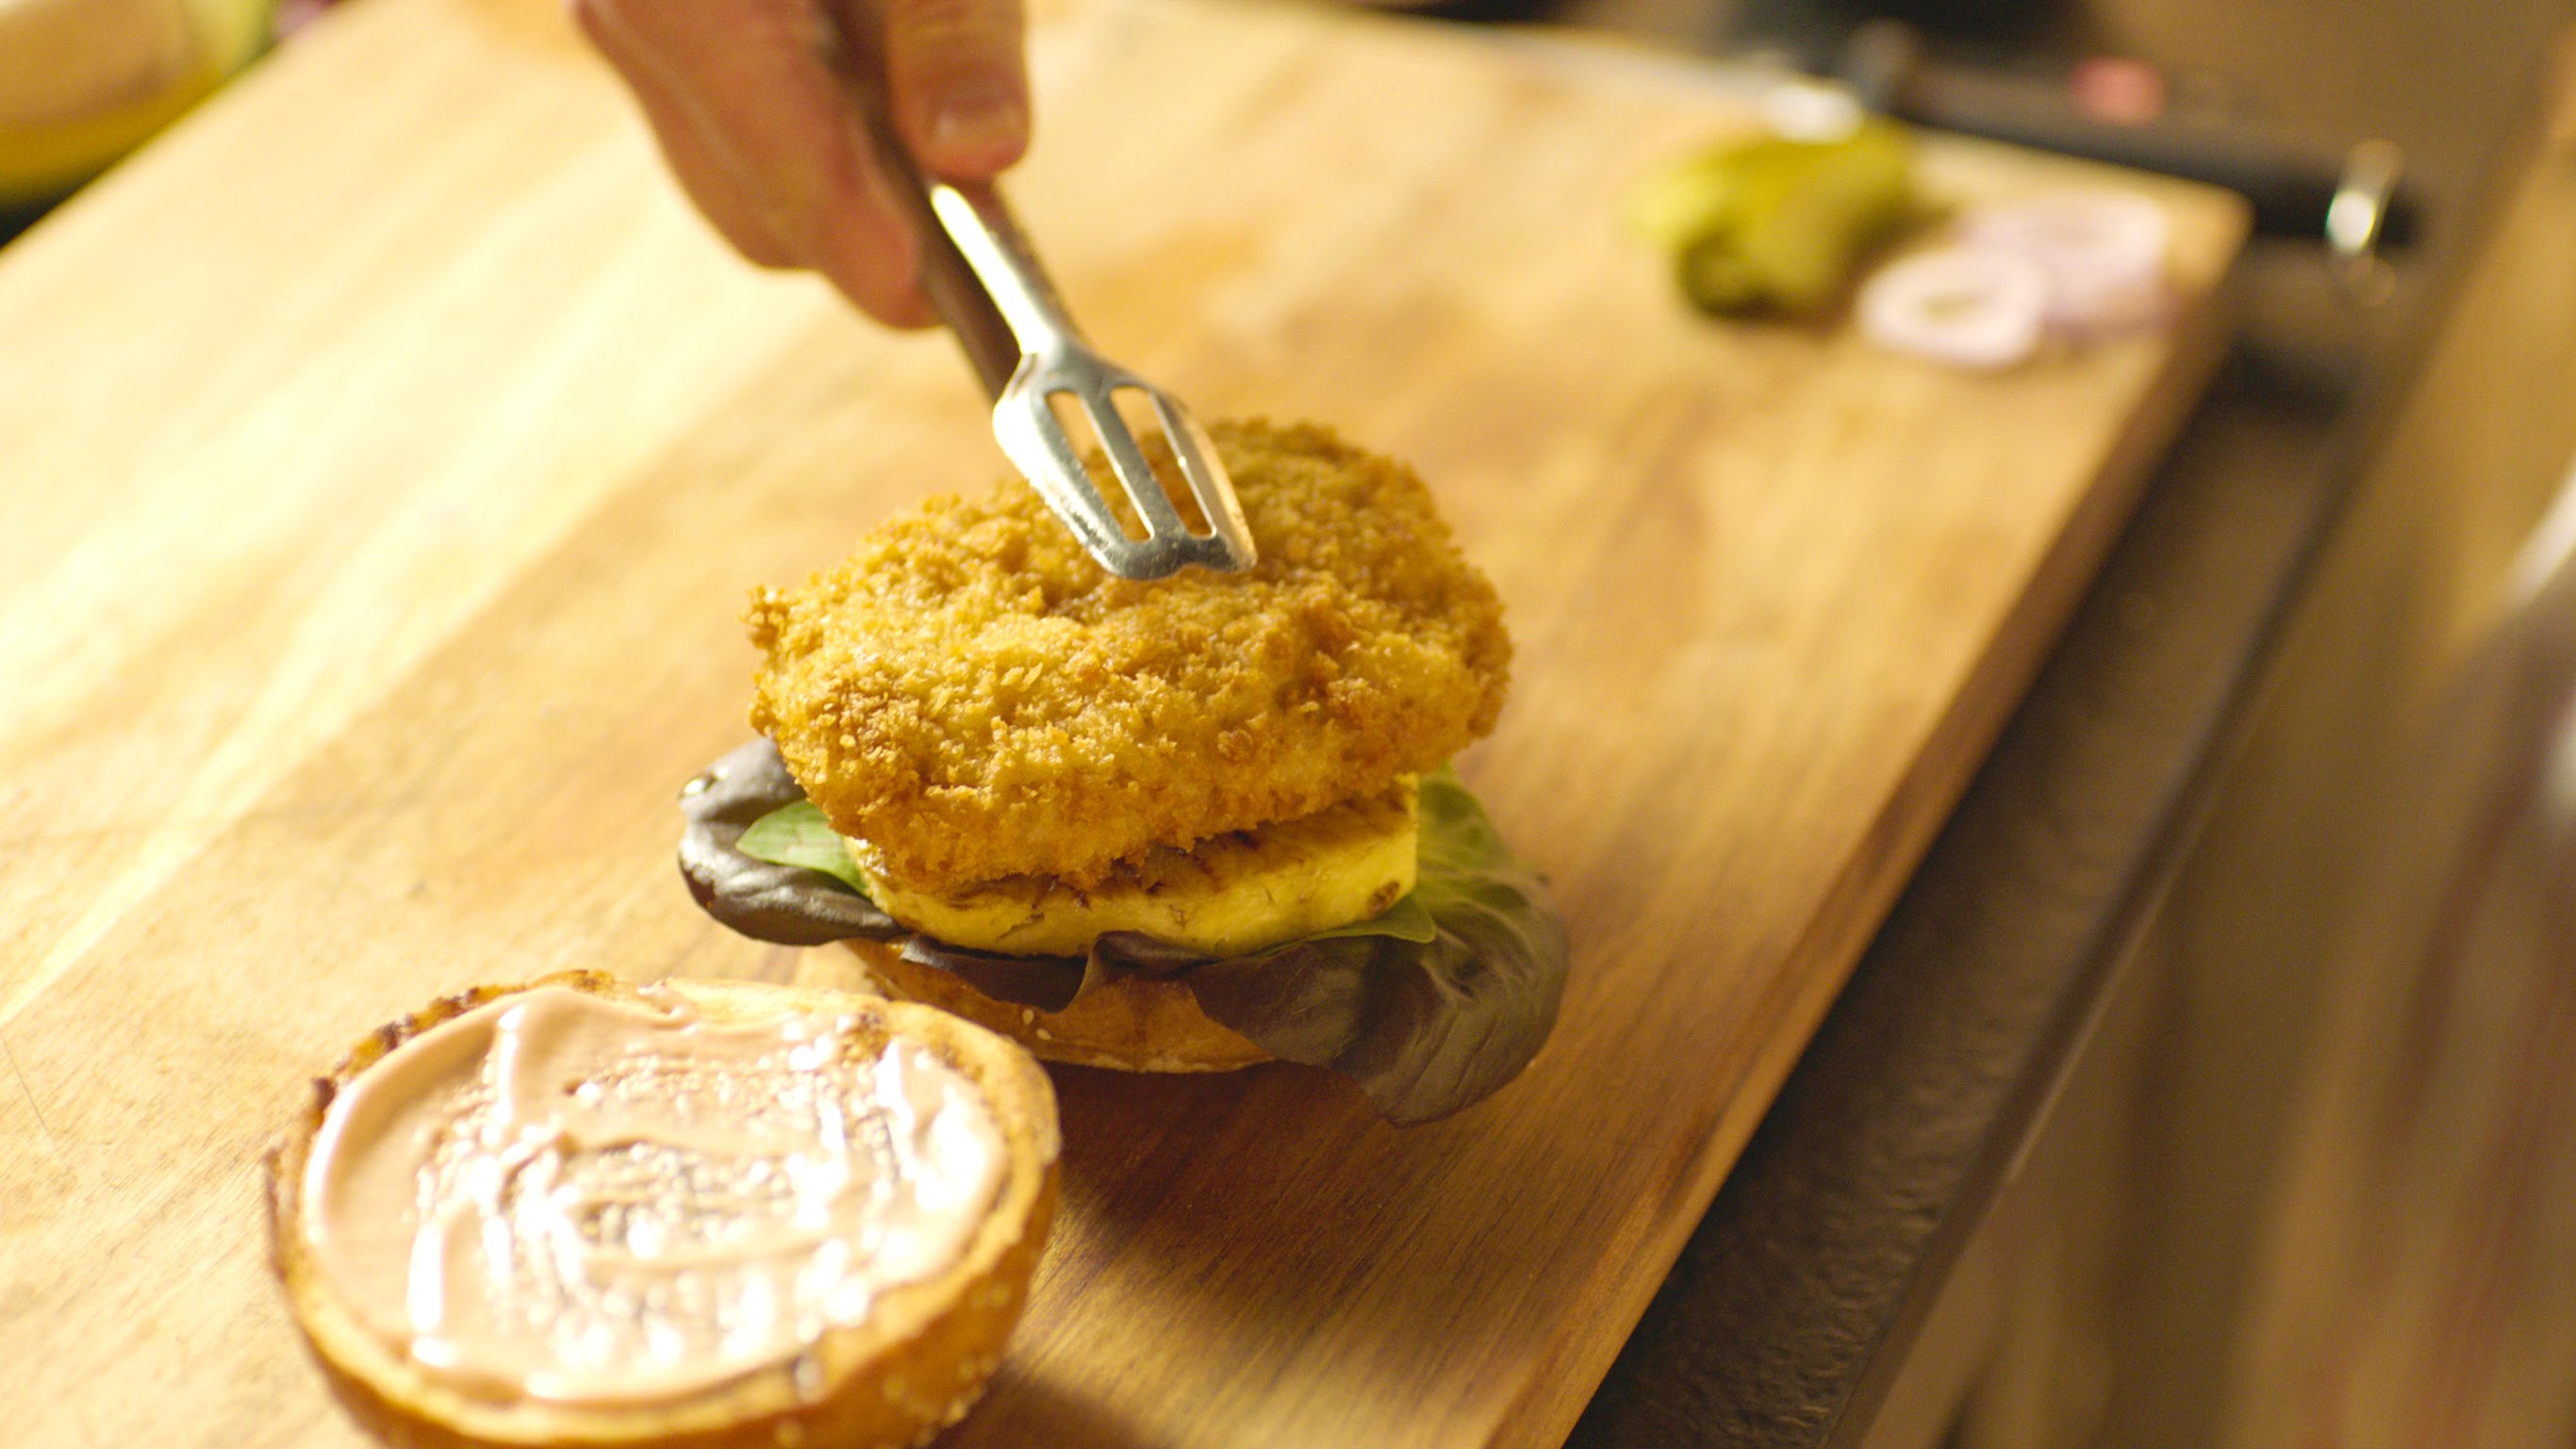 Cultured chicken burgers sit at the heart of a seasonally-inspired menu of locally-grown, freshly-sourced dishes made by our team of chefs in the sleek open kitchen.